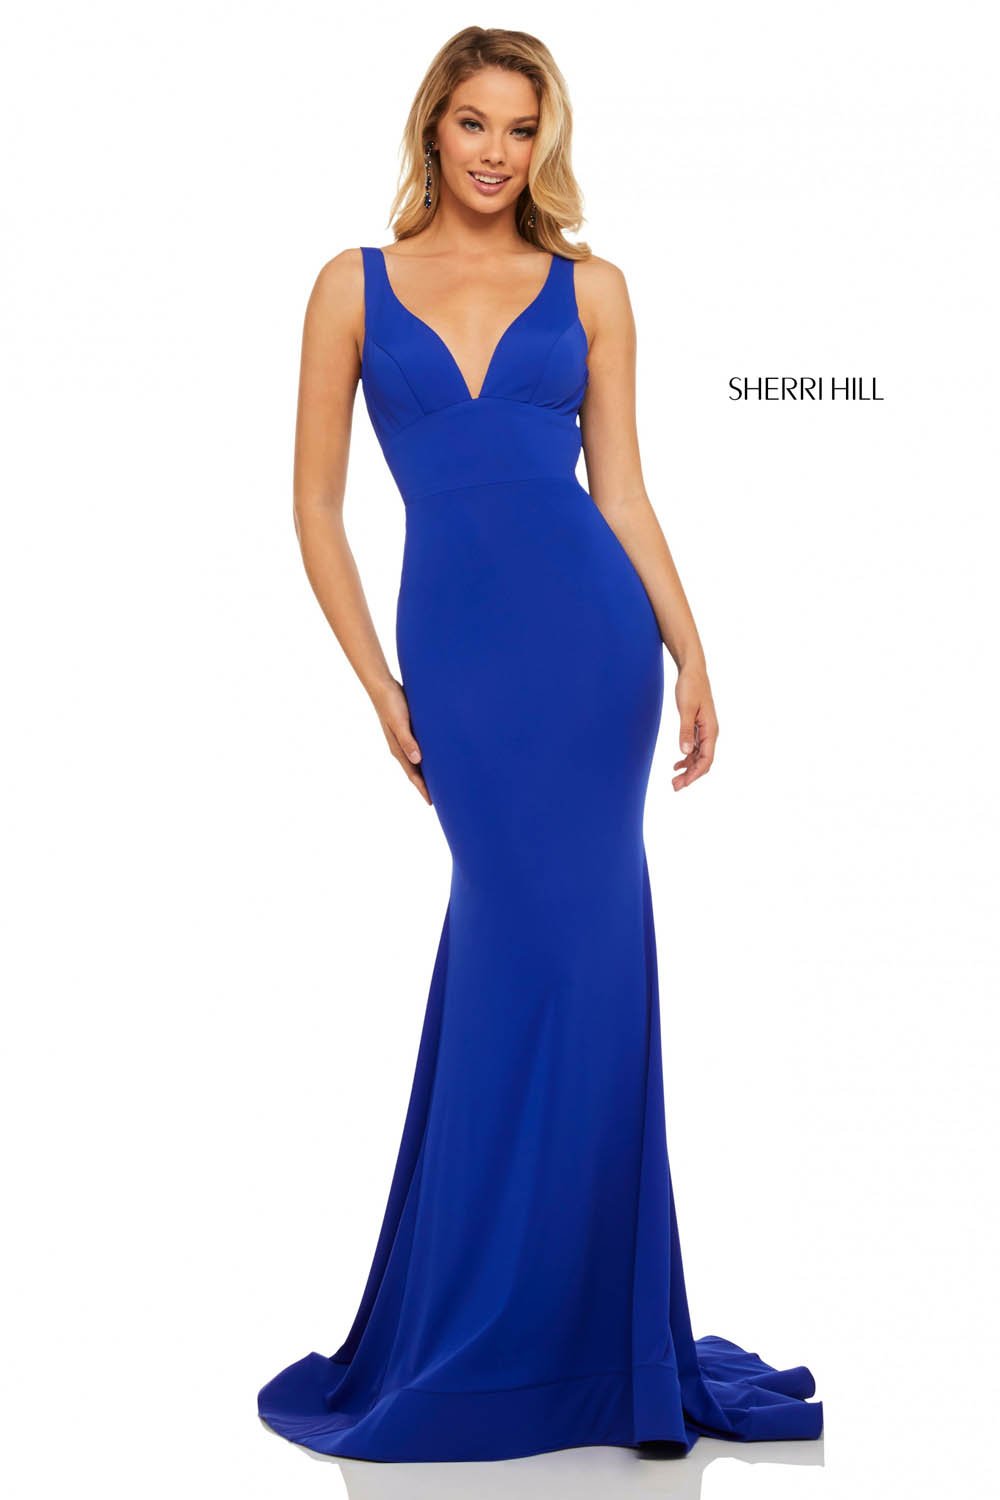 Sherri Hill 52790 dress images in these colors: Purple, Navy, Royal, Yellow, Fuchsia, Black, Emerald.